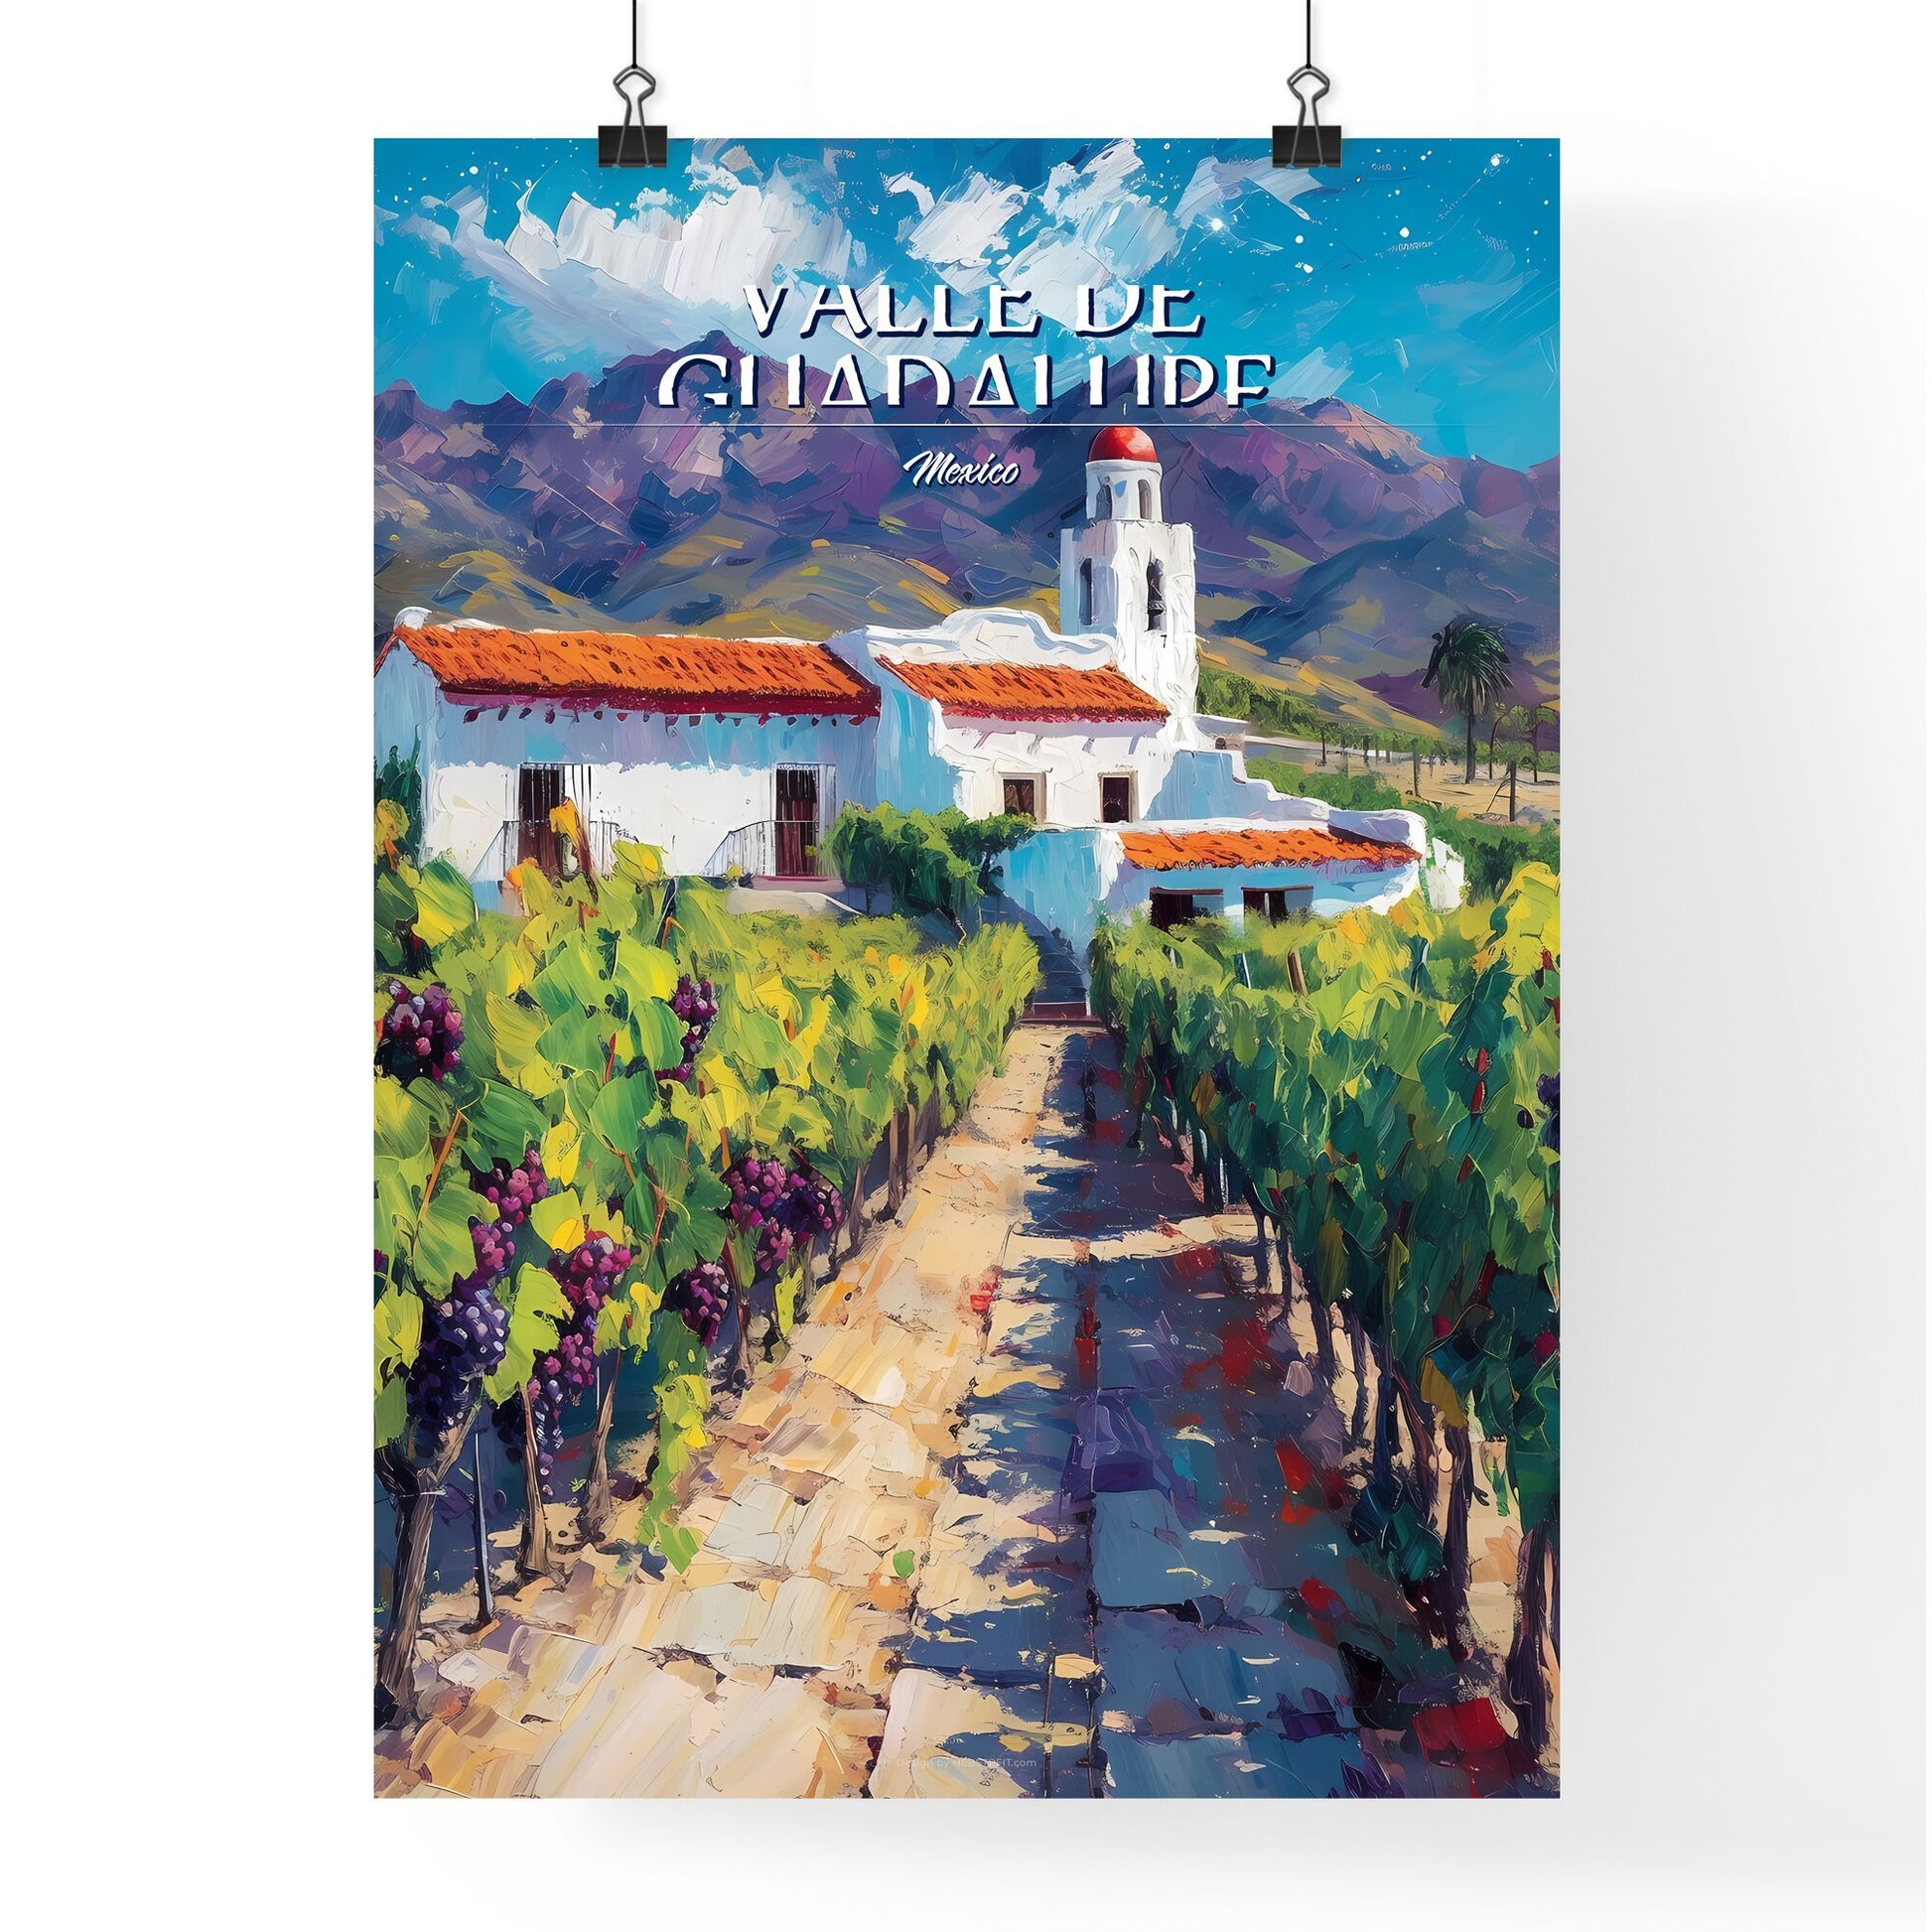 Valle de Guadalupe, Mexico - Art print of a painting of a white building with a red roof surrounded by rows of grapes Default Title